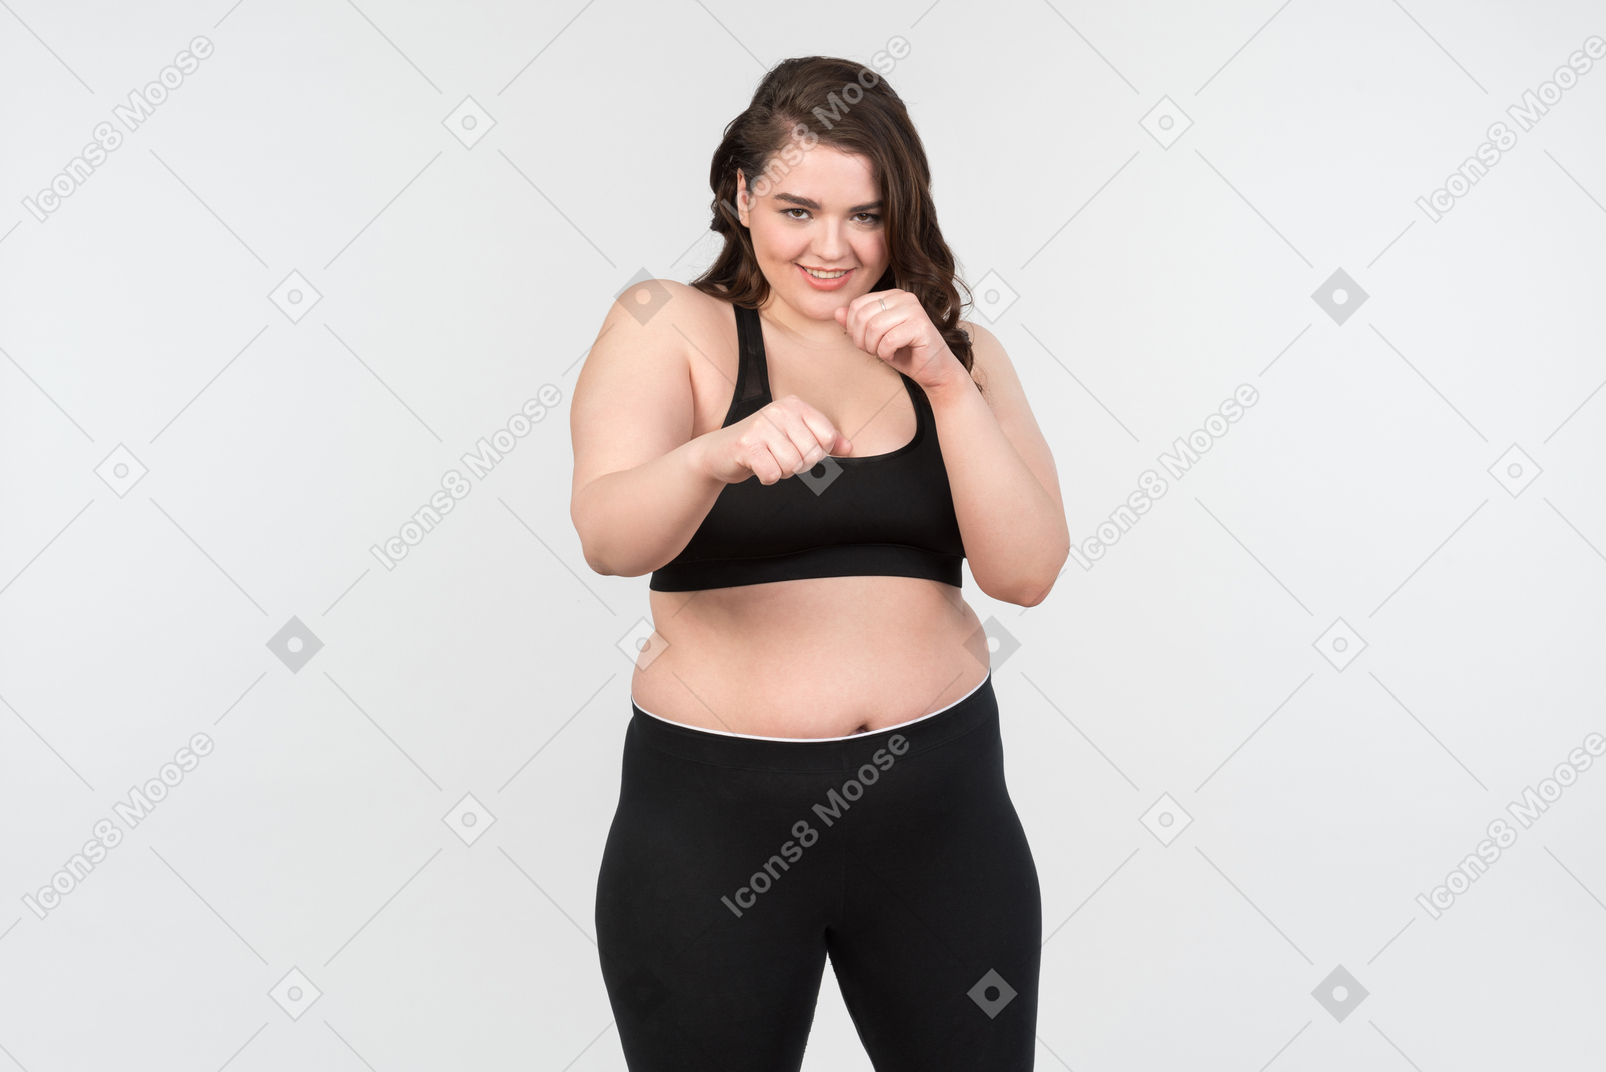 Smiling young plus-size woman standing in fighting stance